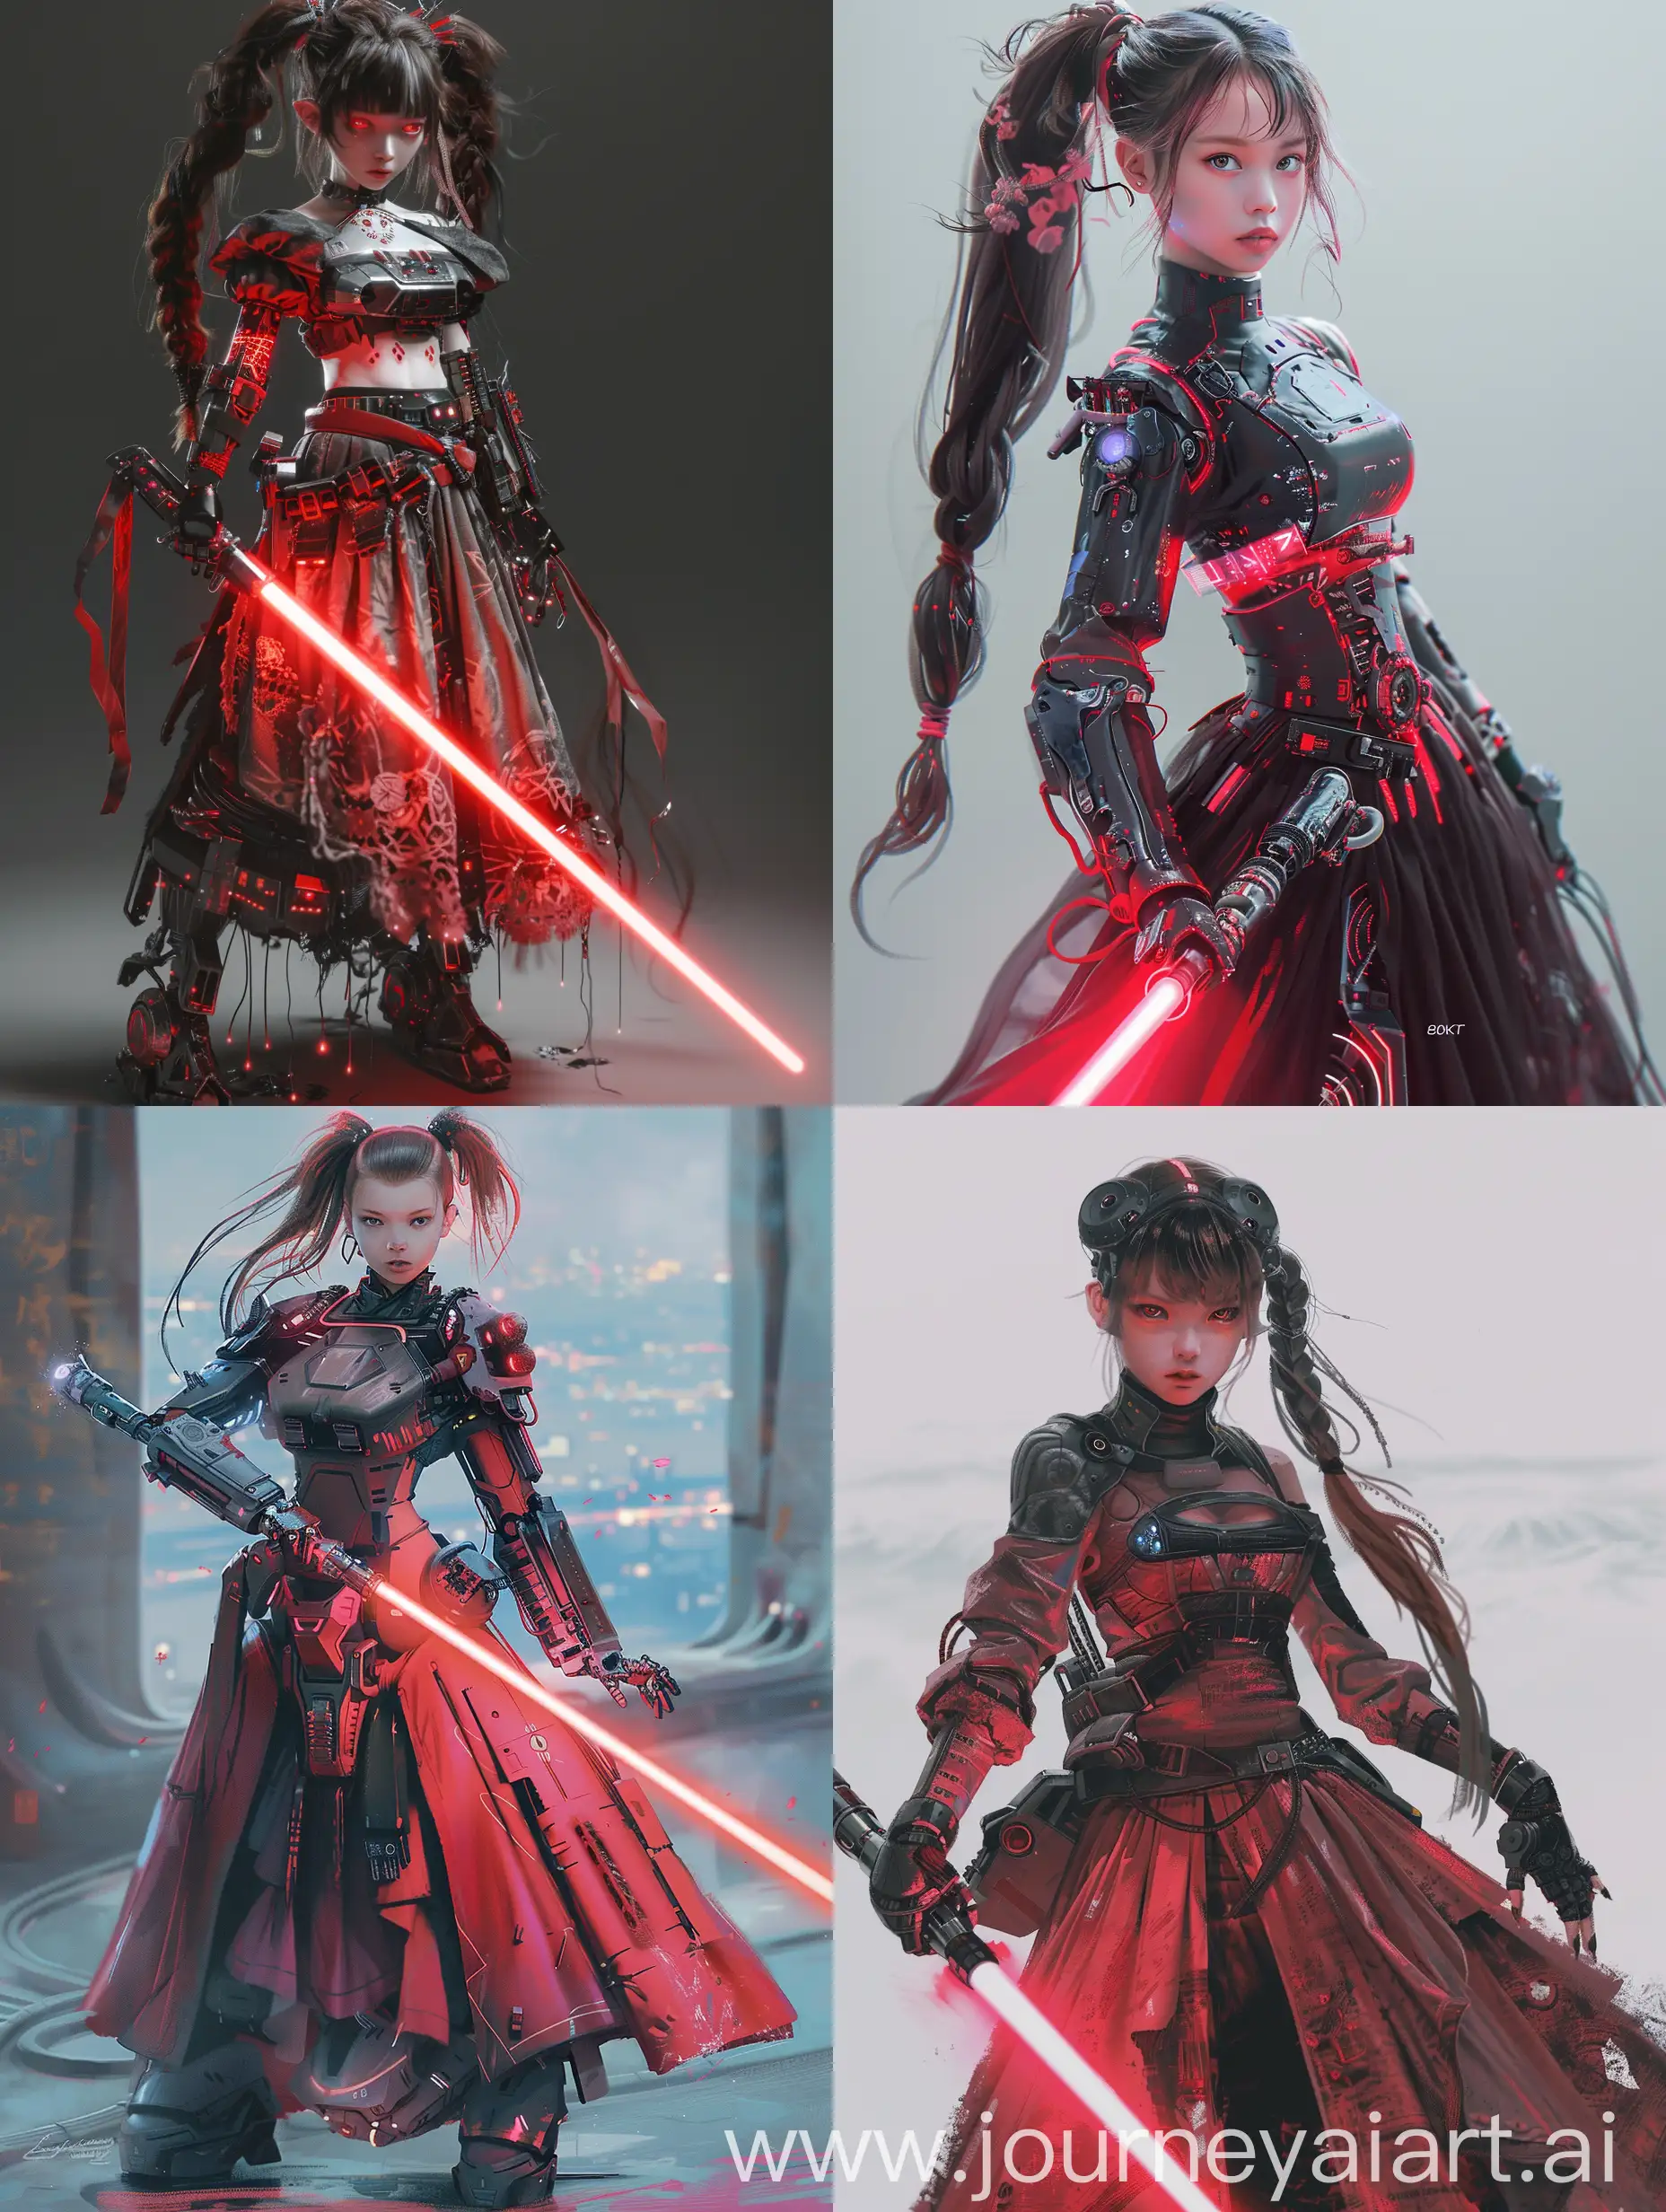 Futuristic-Cyberpunk-Girl-with-Red-Mecha-and-Lightsaber